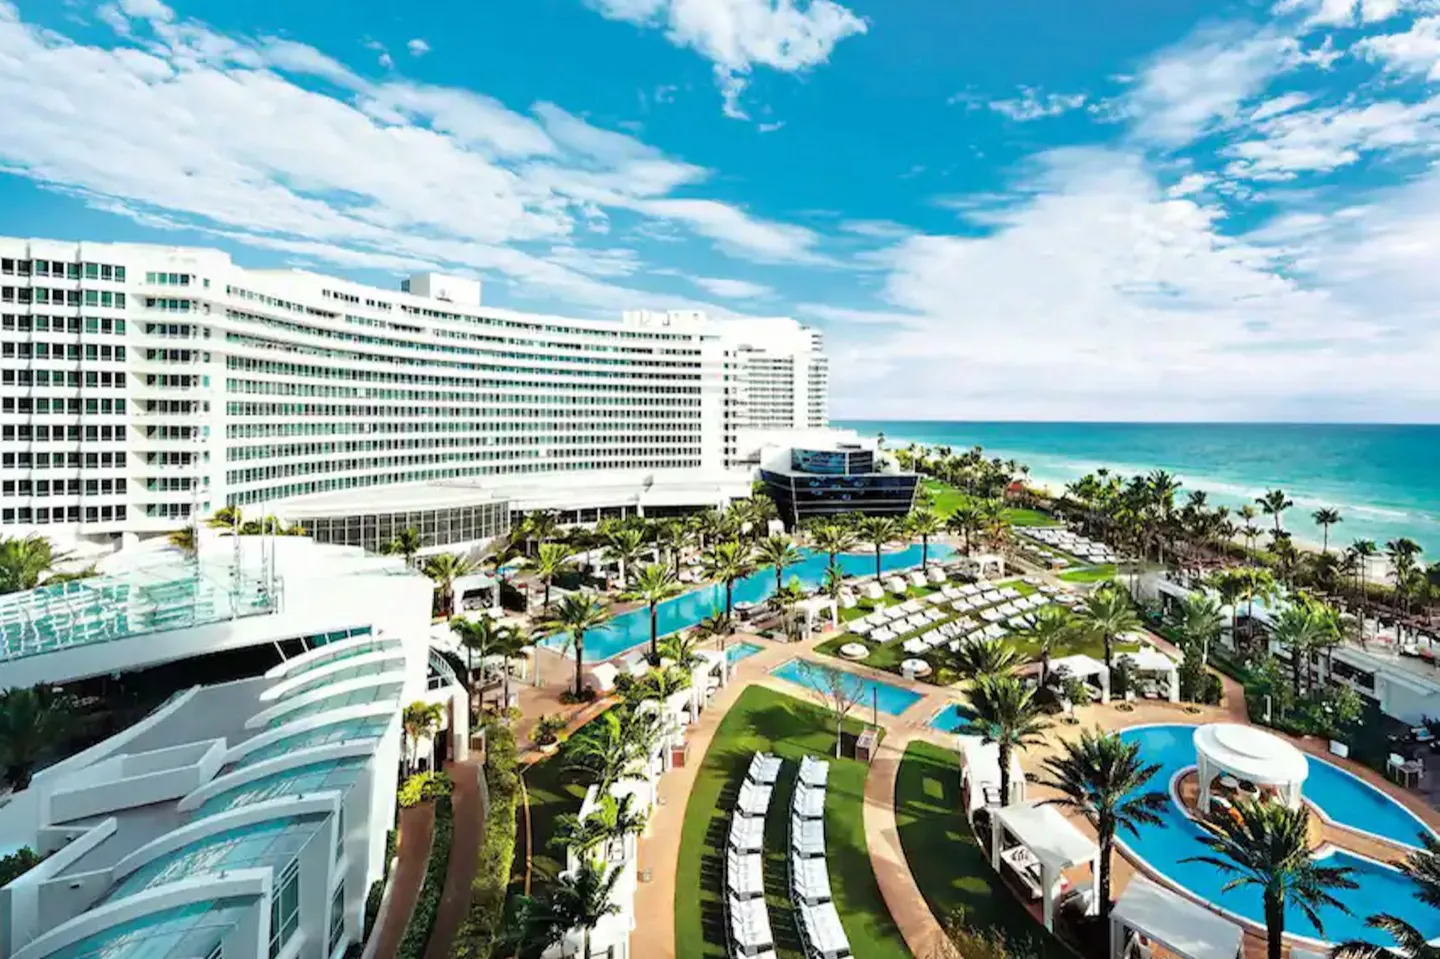 Stay in a five-star hotel in South Beach for the F1 Miami Grand Prix weekend